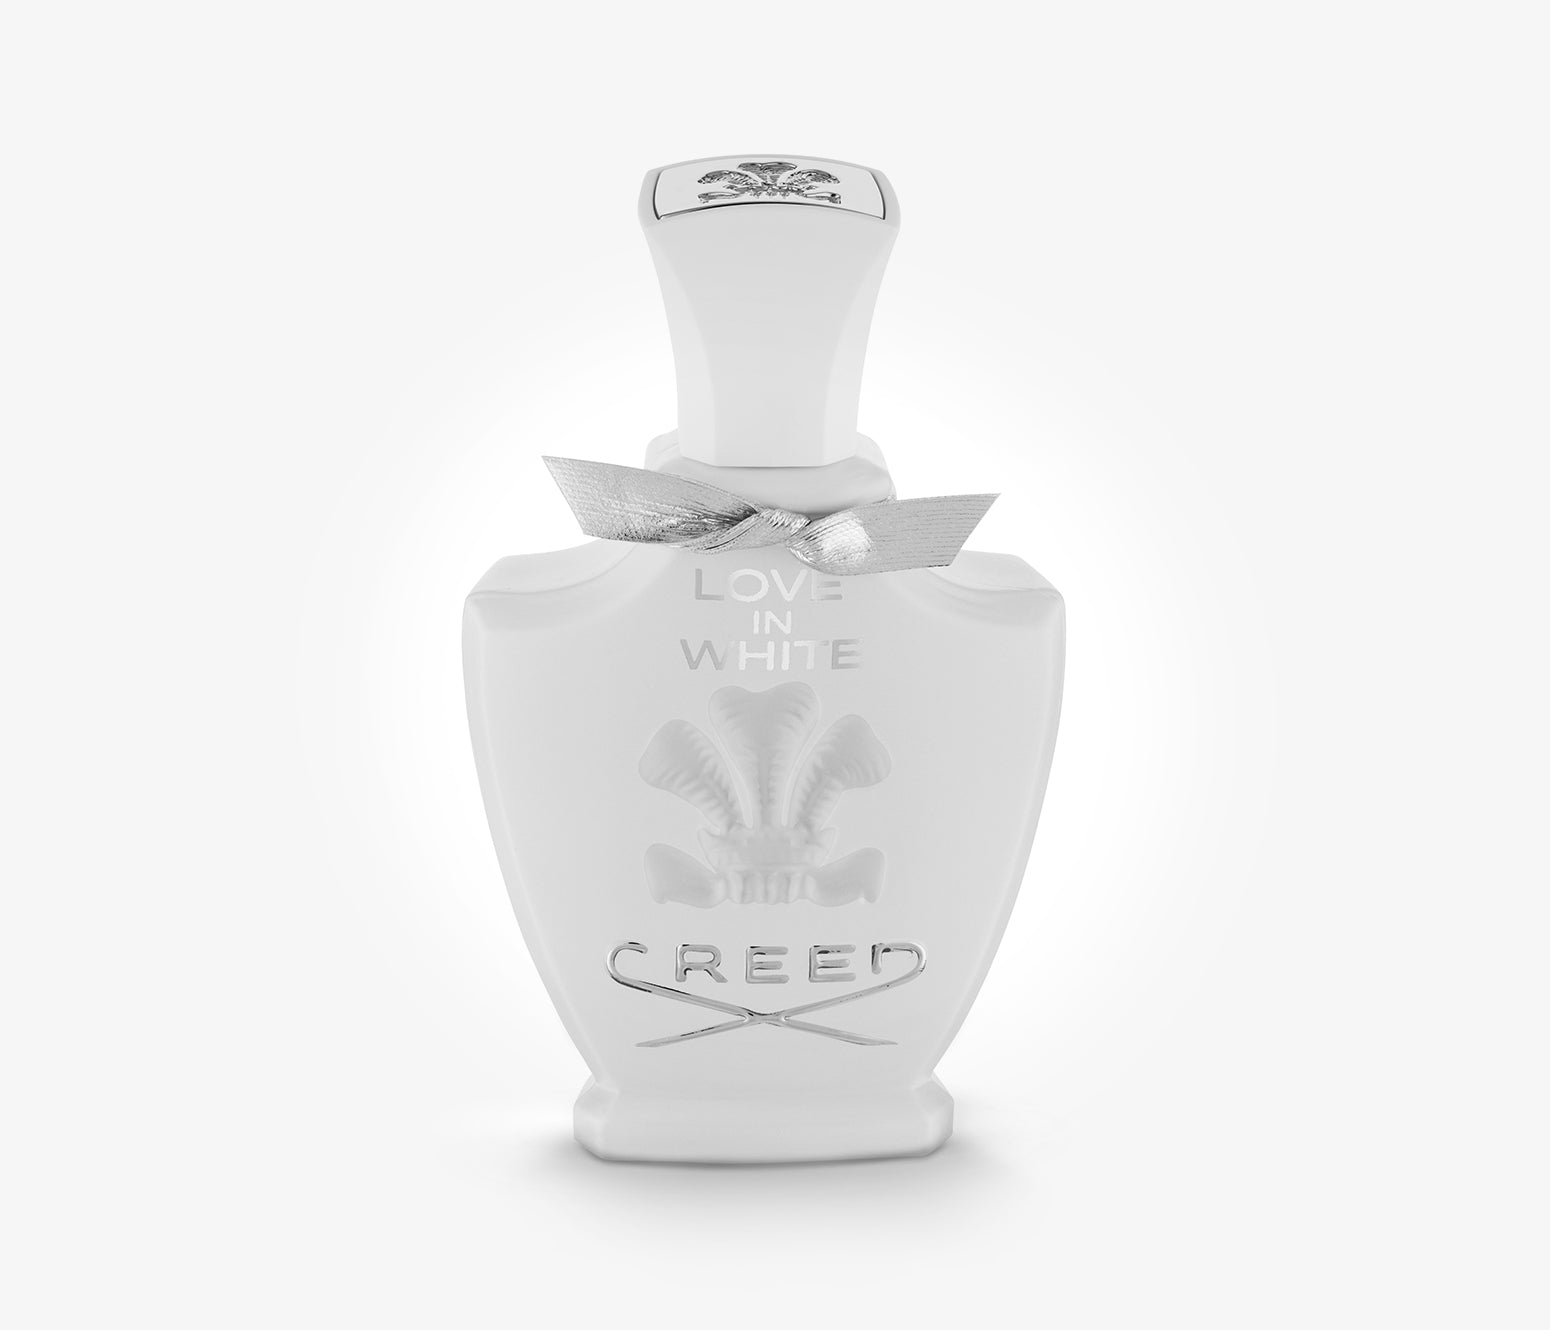 Creed - Love in White - 75ml - EFT4253 - Product Image - Fragrance - Les Senteurs